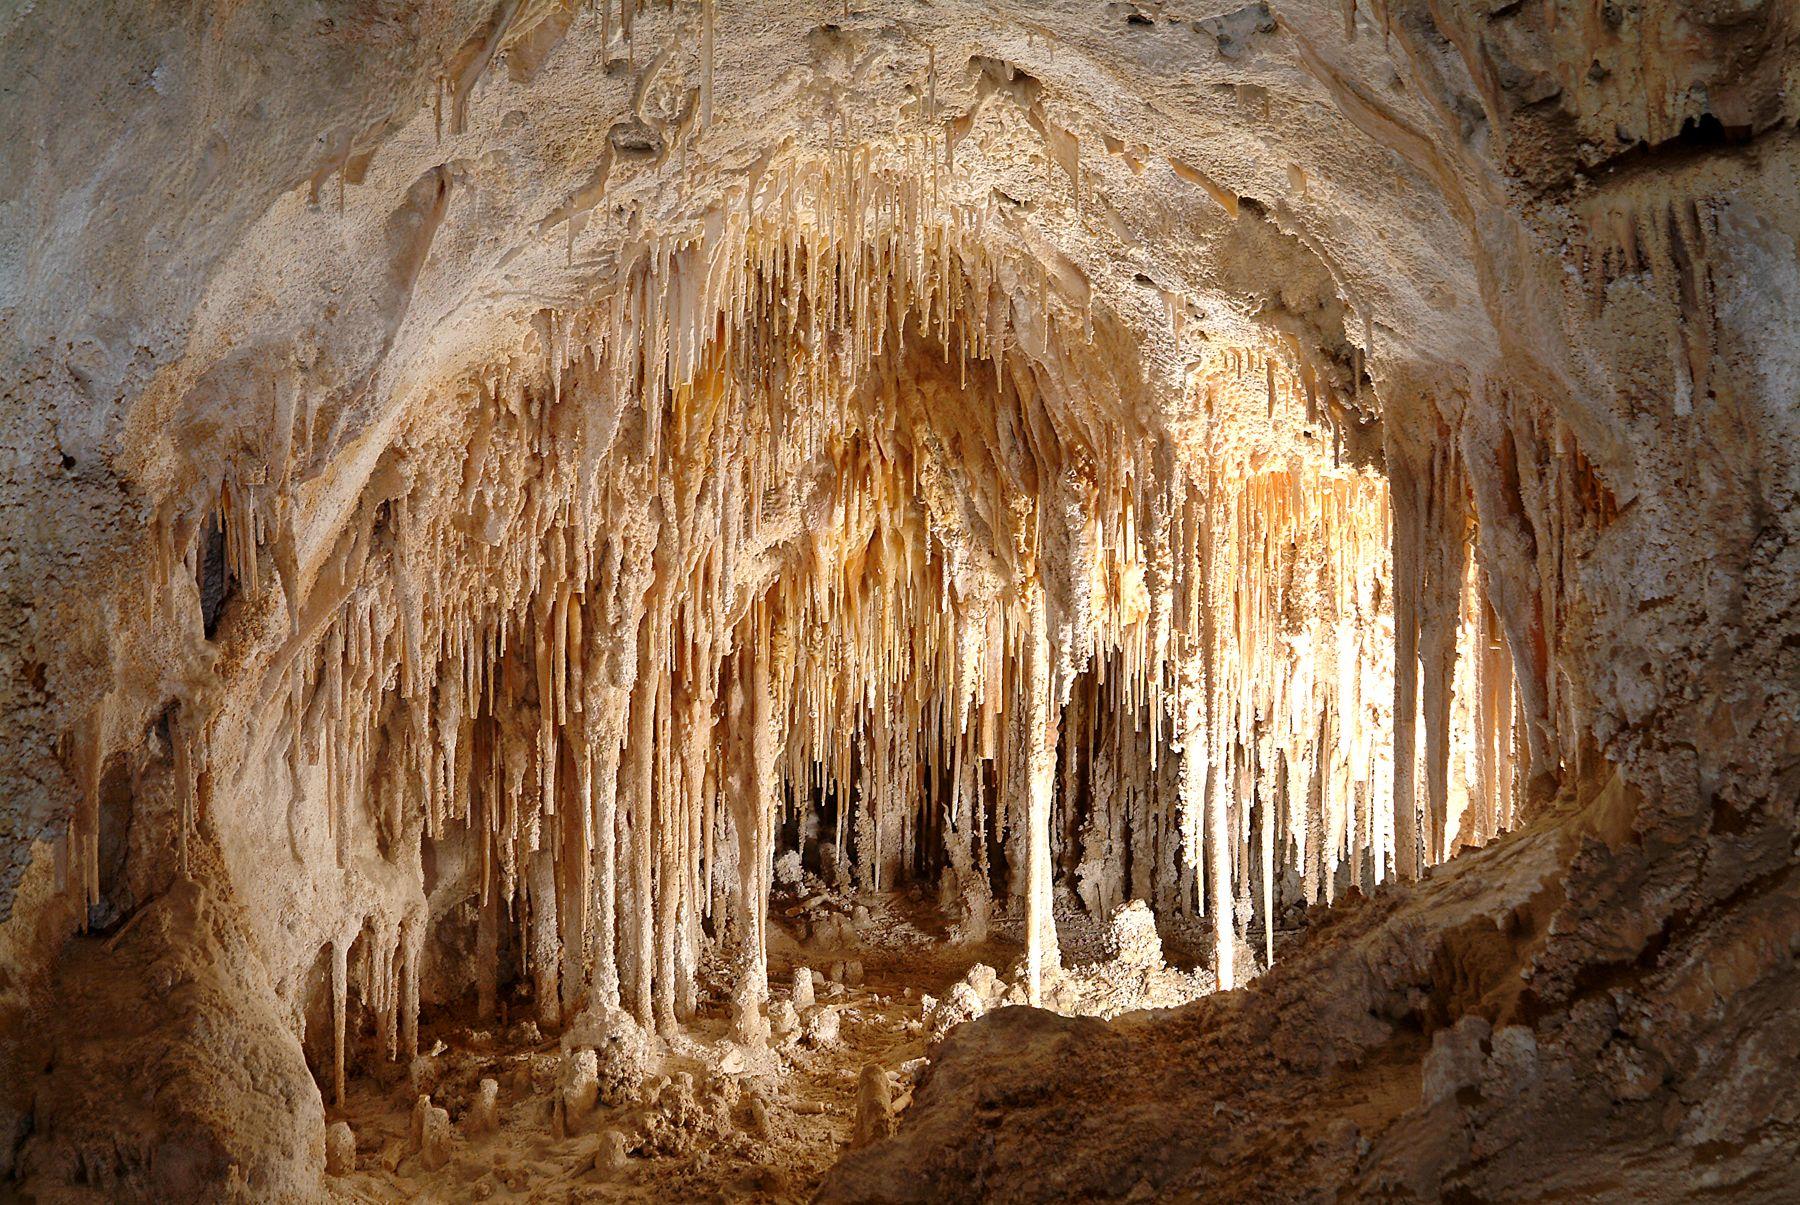 Carlsbad Caverns National Park Park in New Mexico